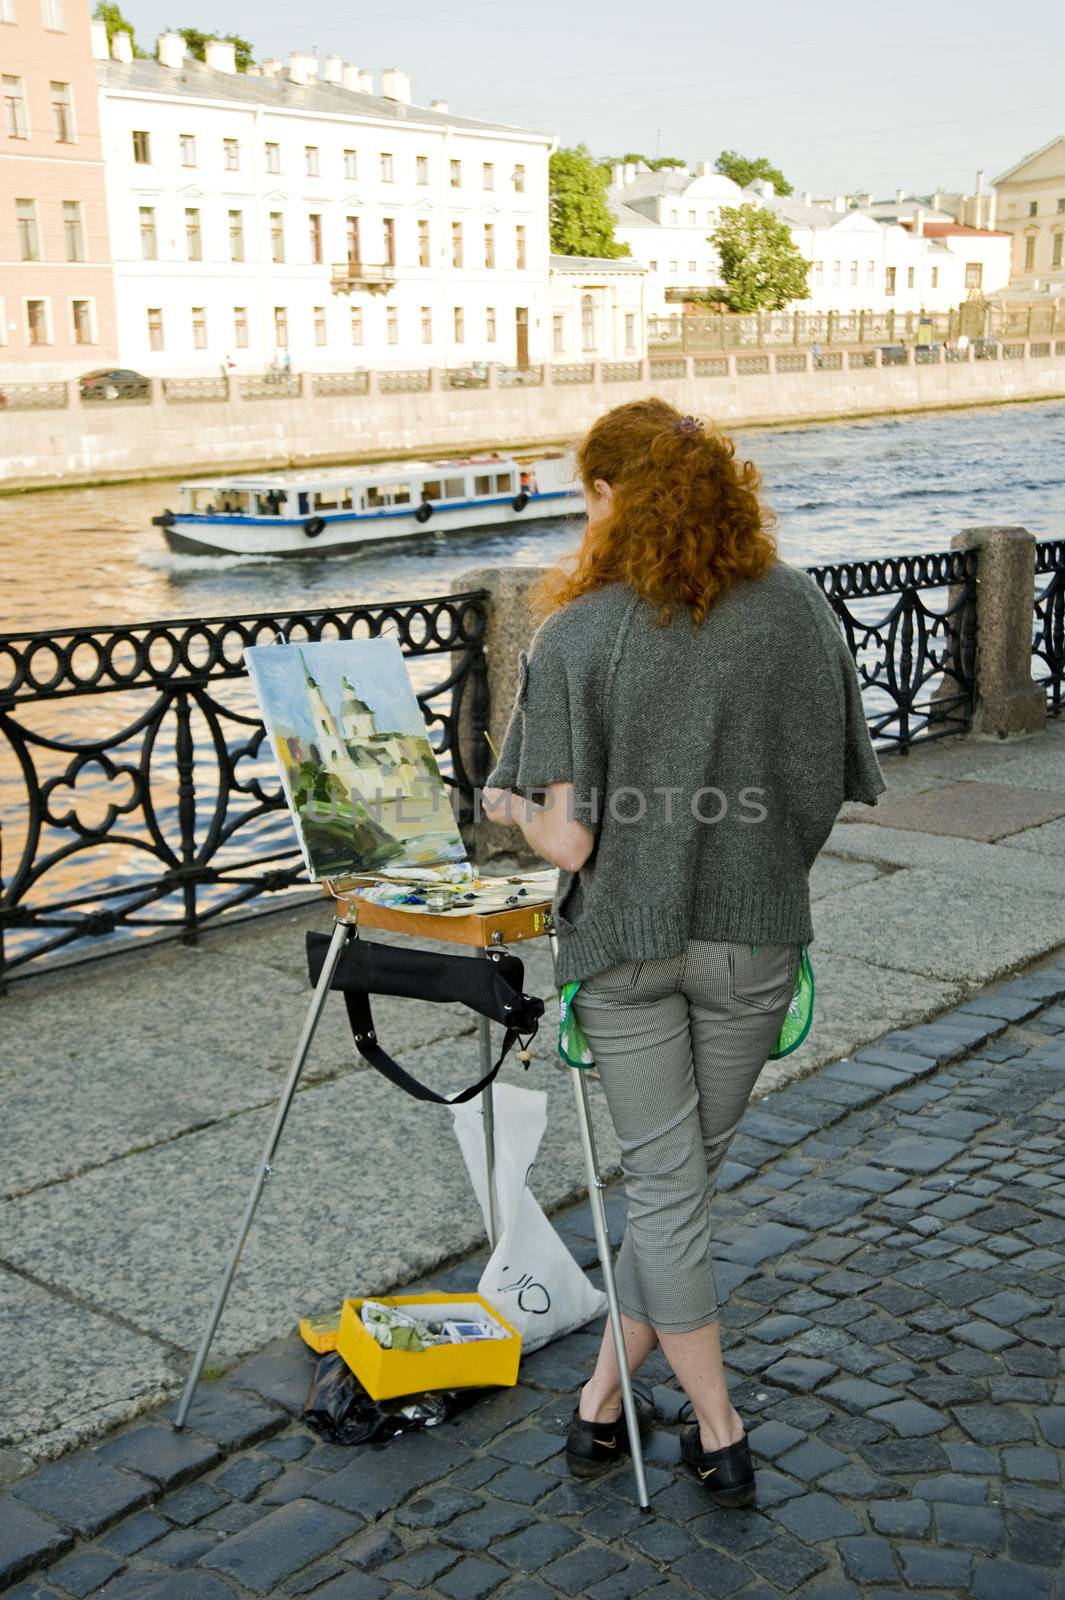 Woman draing the picture taken in St Petersburg Russia